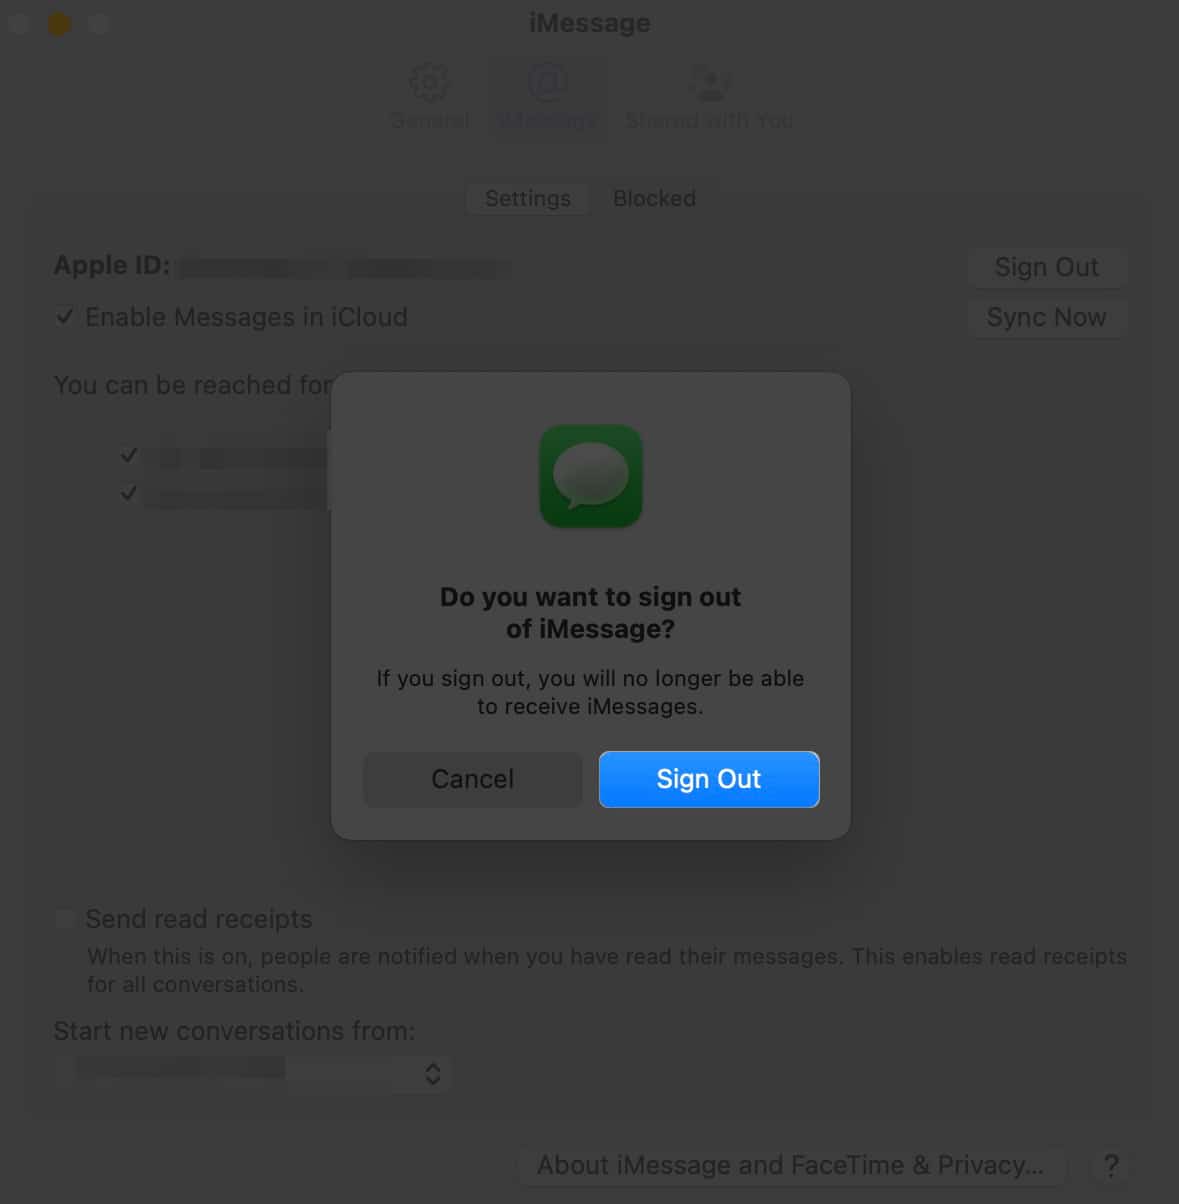 Press Sign out next to your Apple ID.